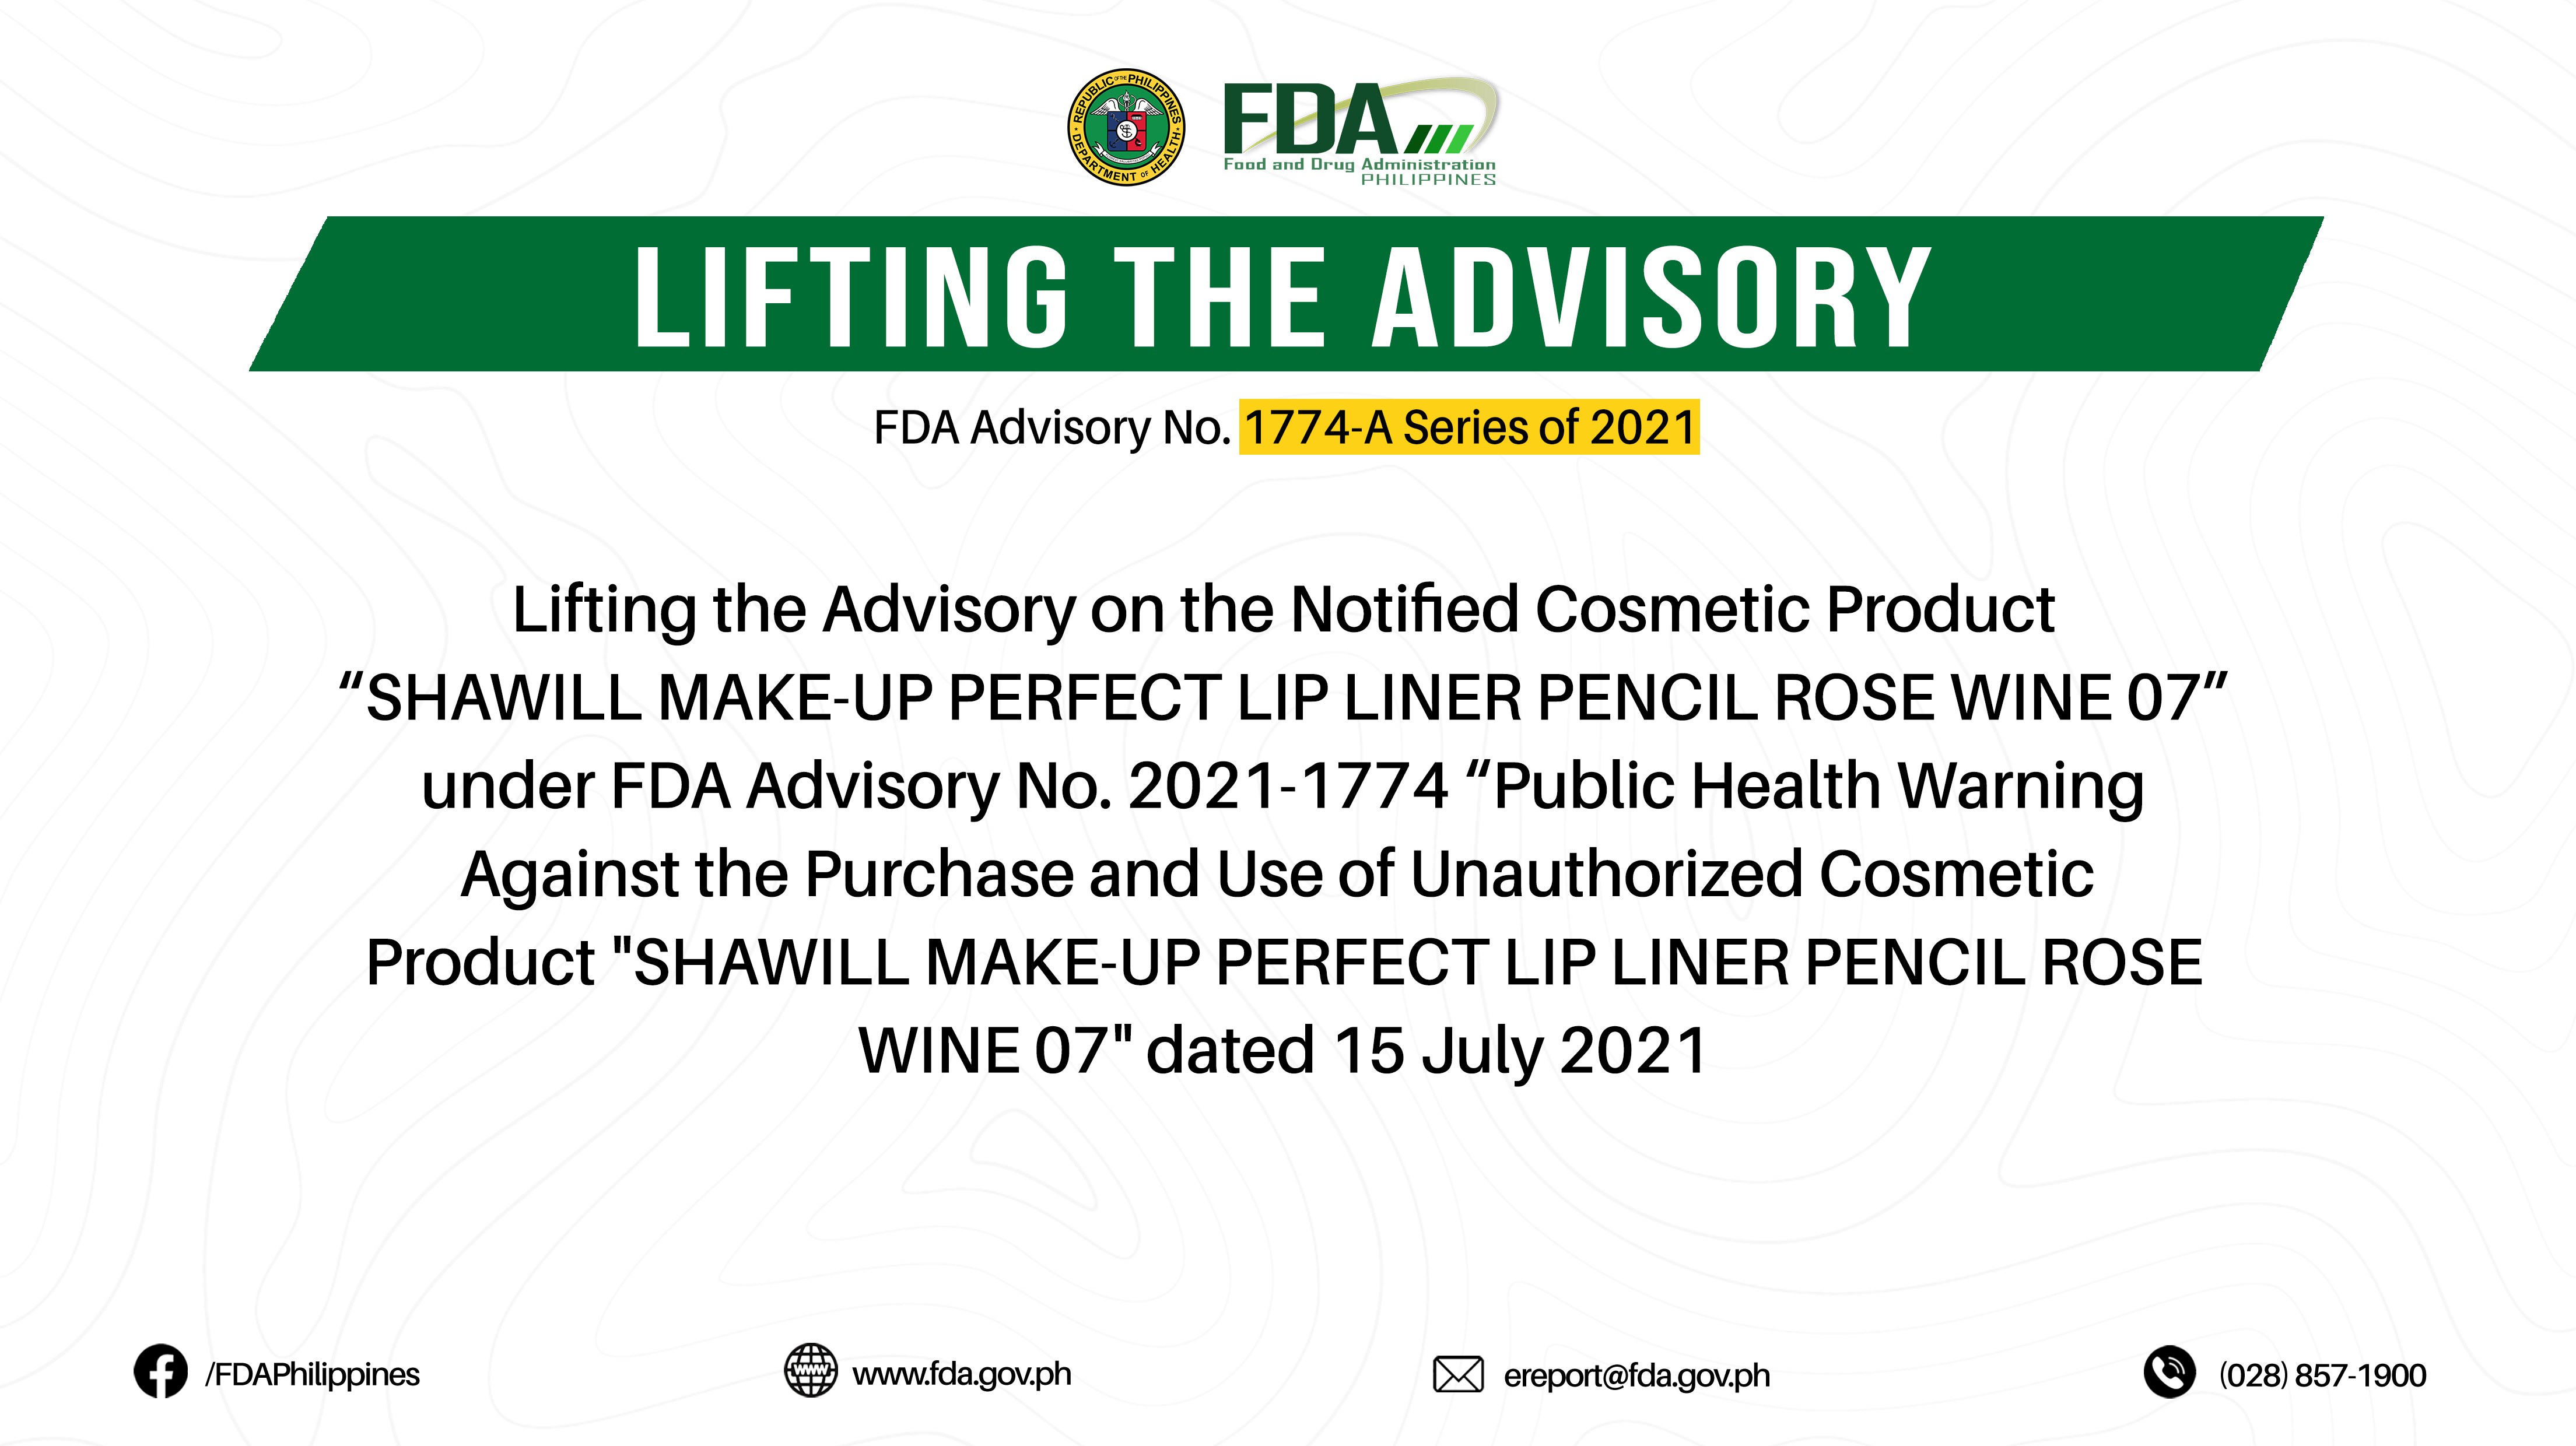 FDA Advisory No.2022-1774-A || Lifting the Advisory on the Notified Cosmetic Product “SHAWILL MAKE-UP PERFECT LIP LINER PENCIL ROSE WINE 07” under FDA Advisory No. 2021-1774 “Public Health Warning Against the Purchase and Use of Unauthorized Cosmetic Product “SHAWILL MAKE-UP PERFECT LIP LINER PENCIL ROSE WINE 07” dated 15 July 2021